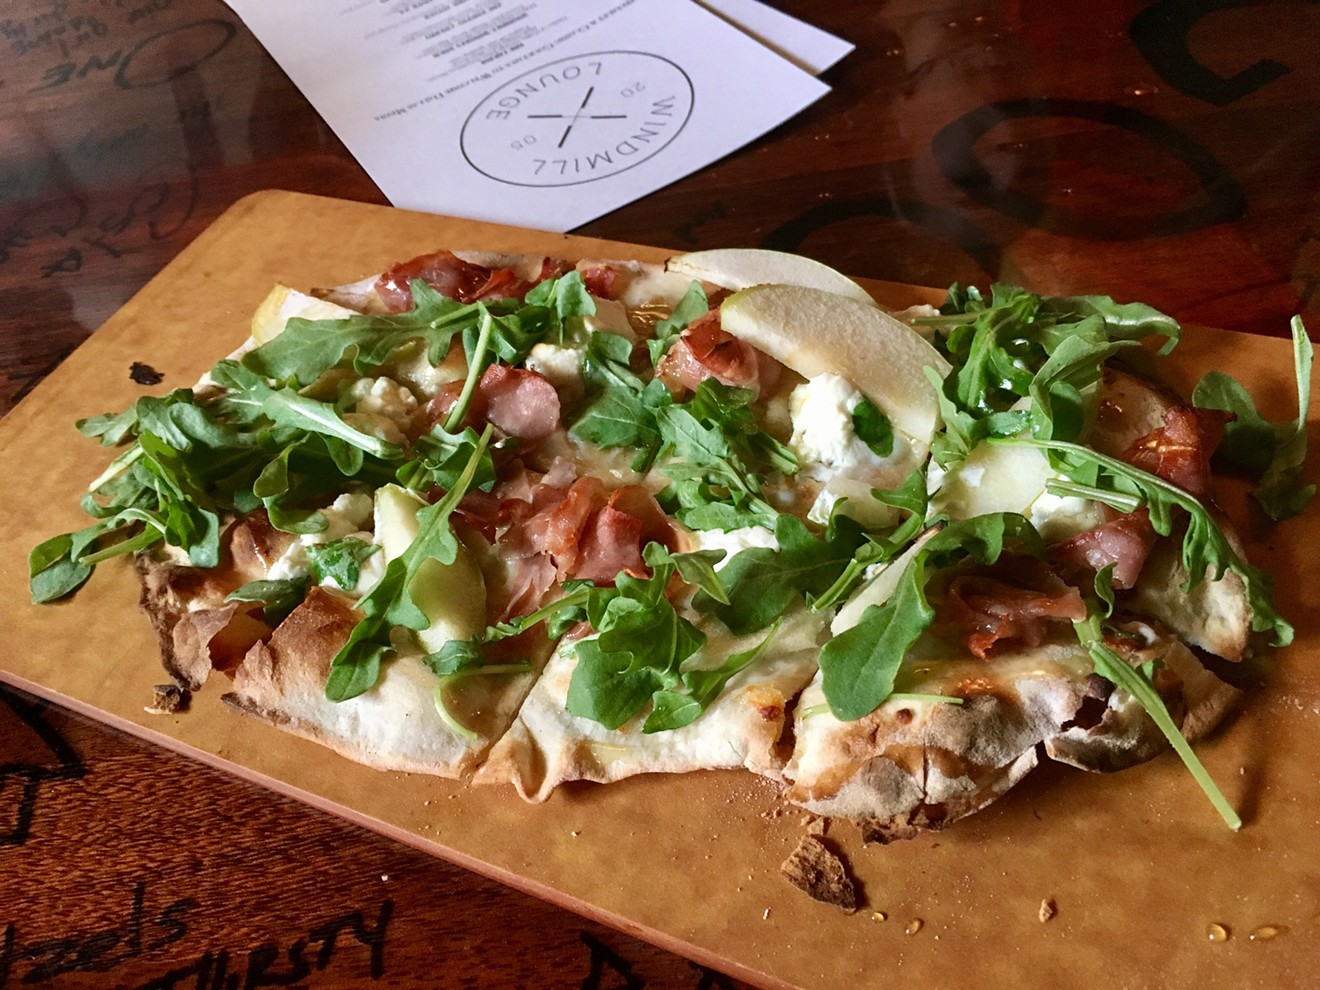 One of the new flatbreads at the Windmill Lounge has prosciutto, apples, goat cheese, arugula and garlic oil.